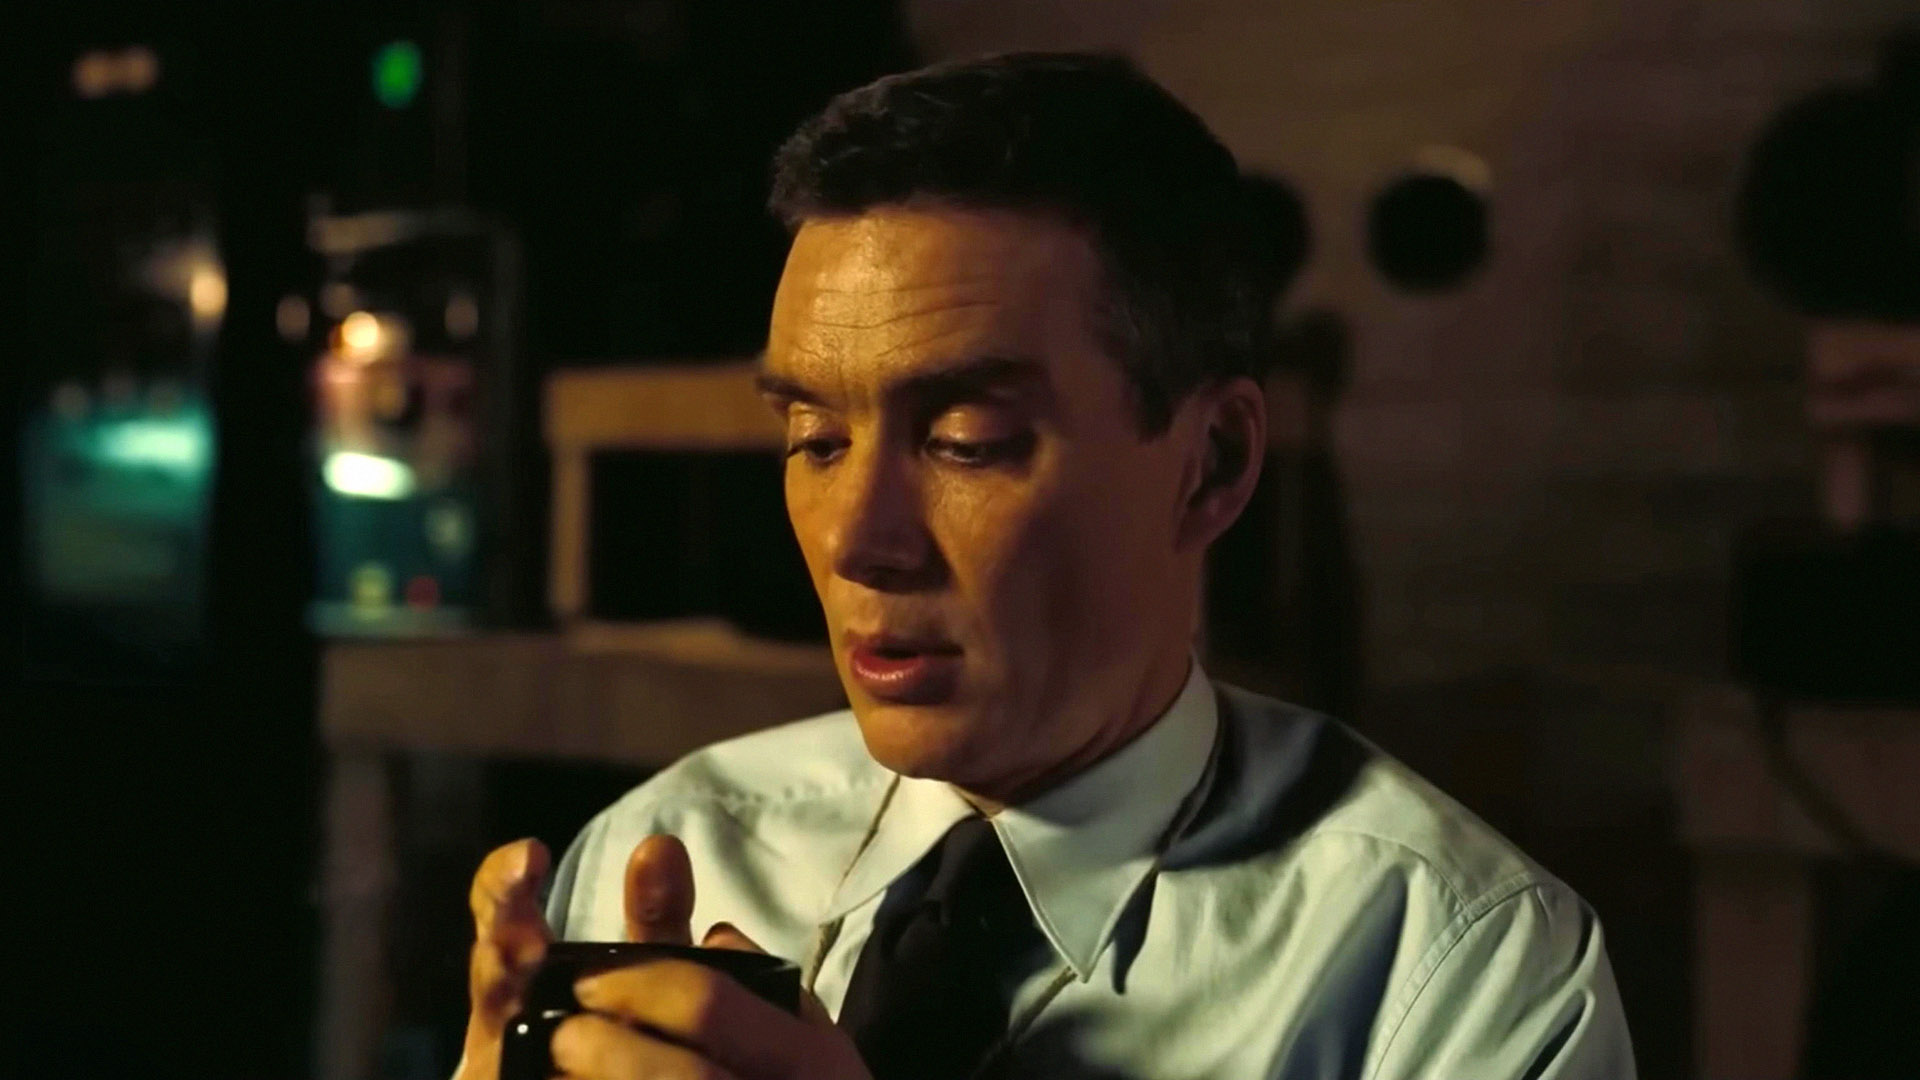 If You Hated This Oppenheimer Scene, You're Not Alone: Oppenheimer's Grandson Disliked It Too